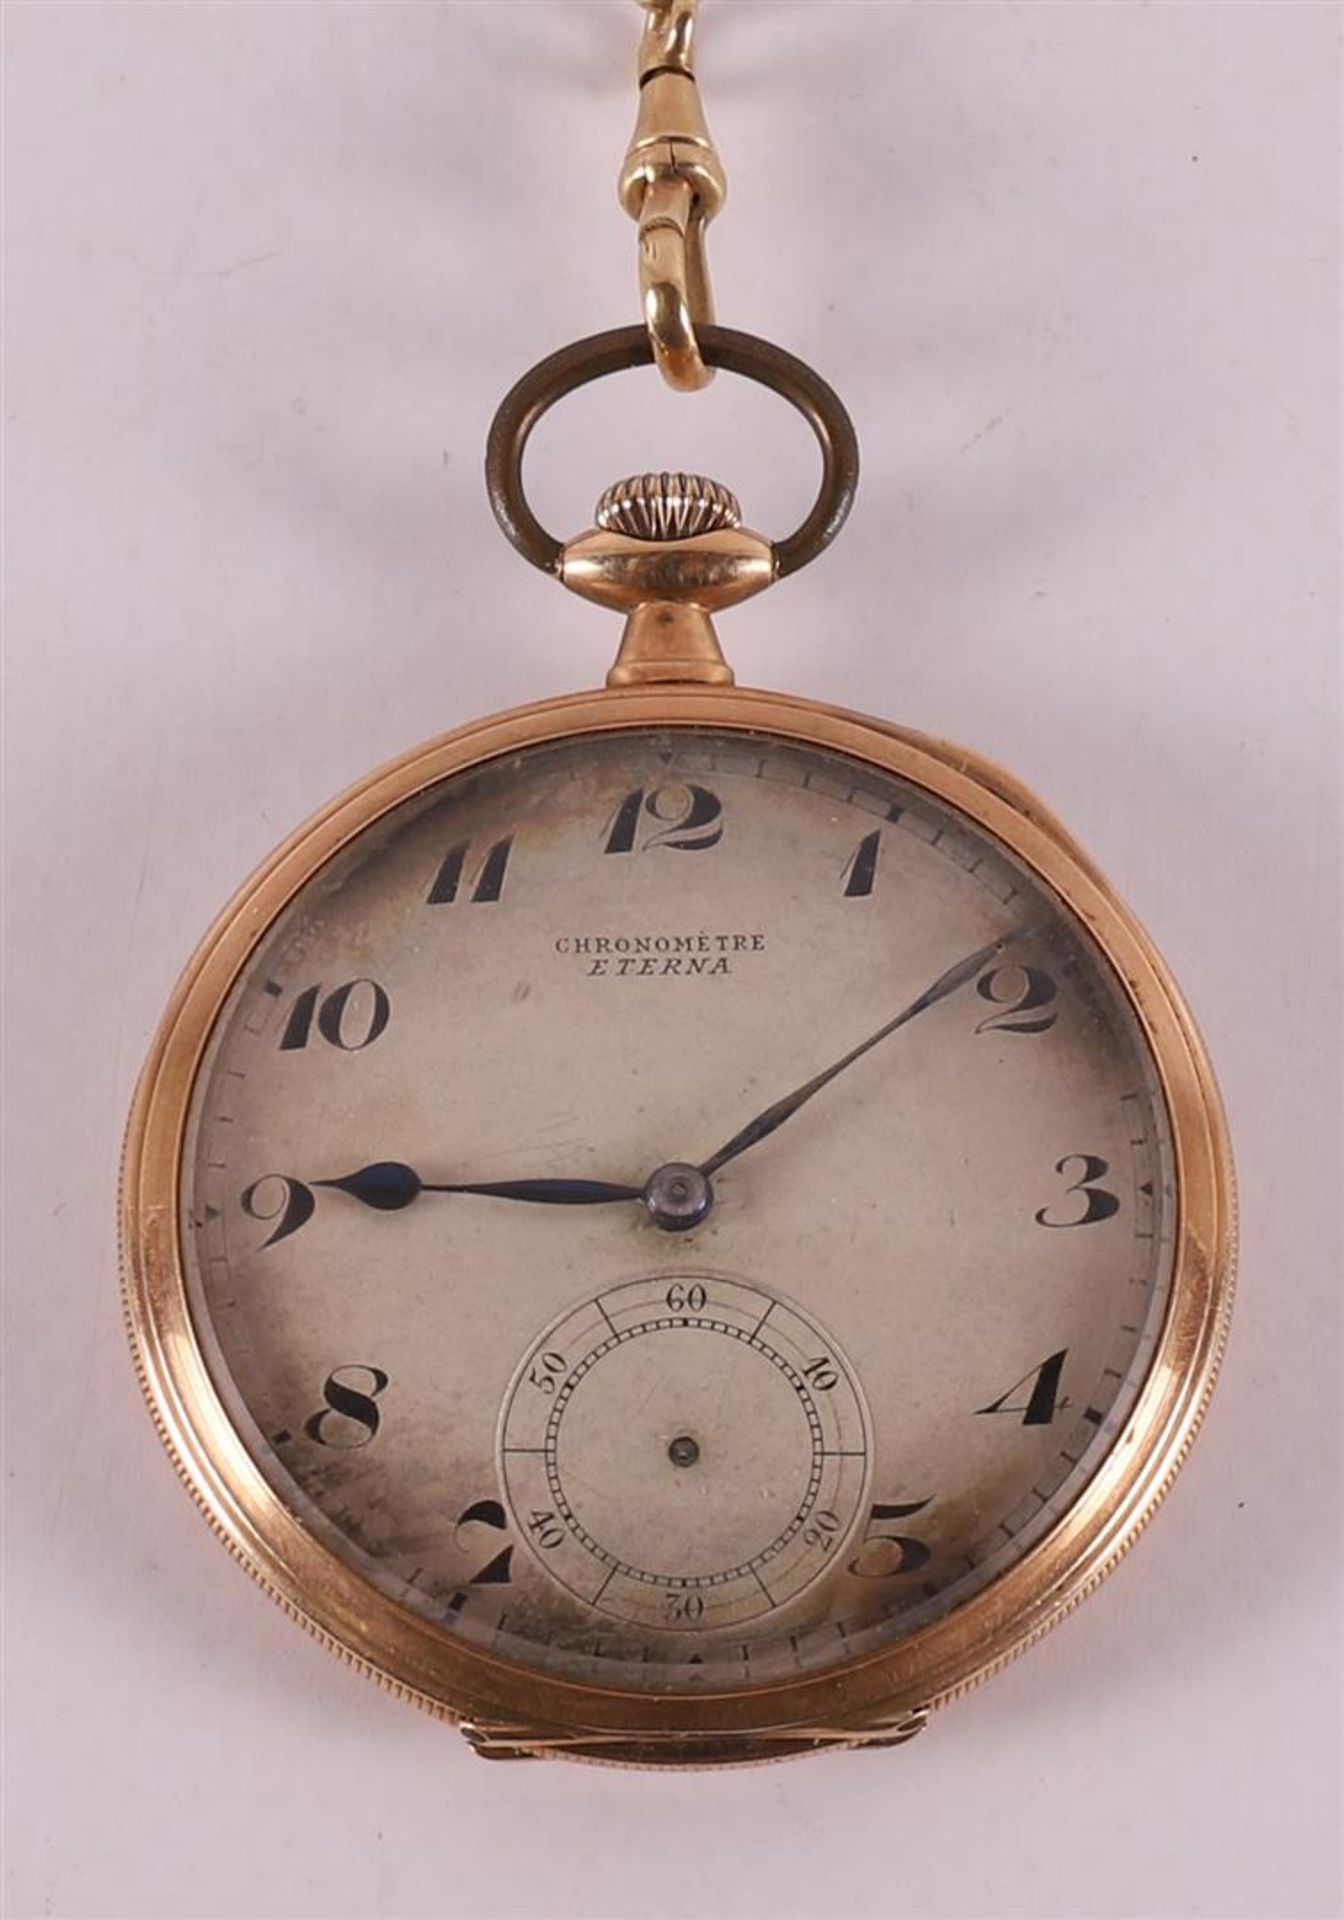 An Eterna men's vest pocket watch in 14 kt yellow gold engraved case with chain - Image 2 of 4